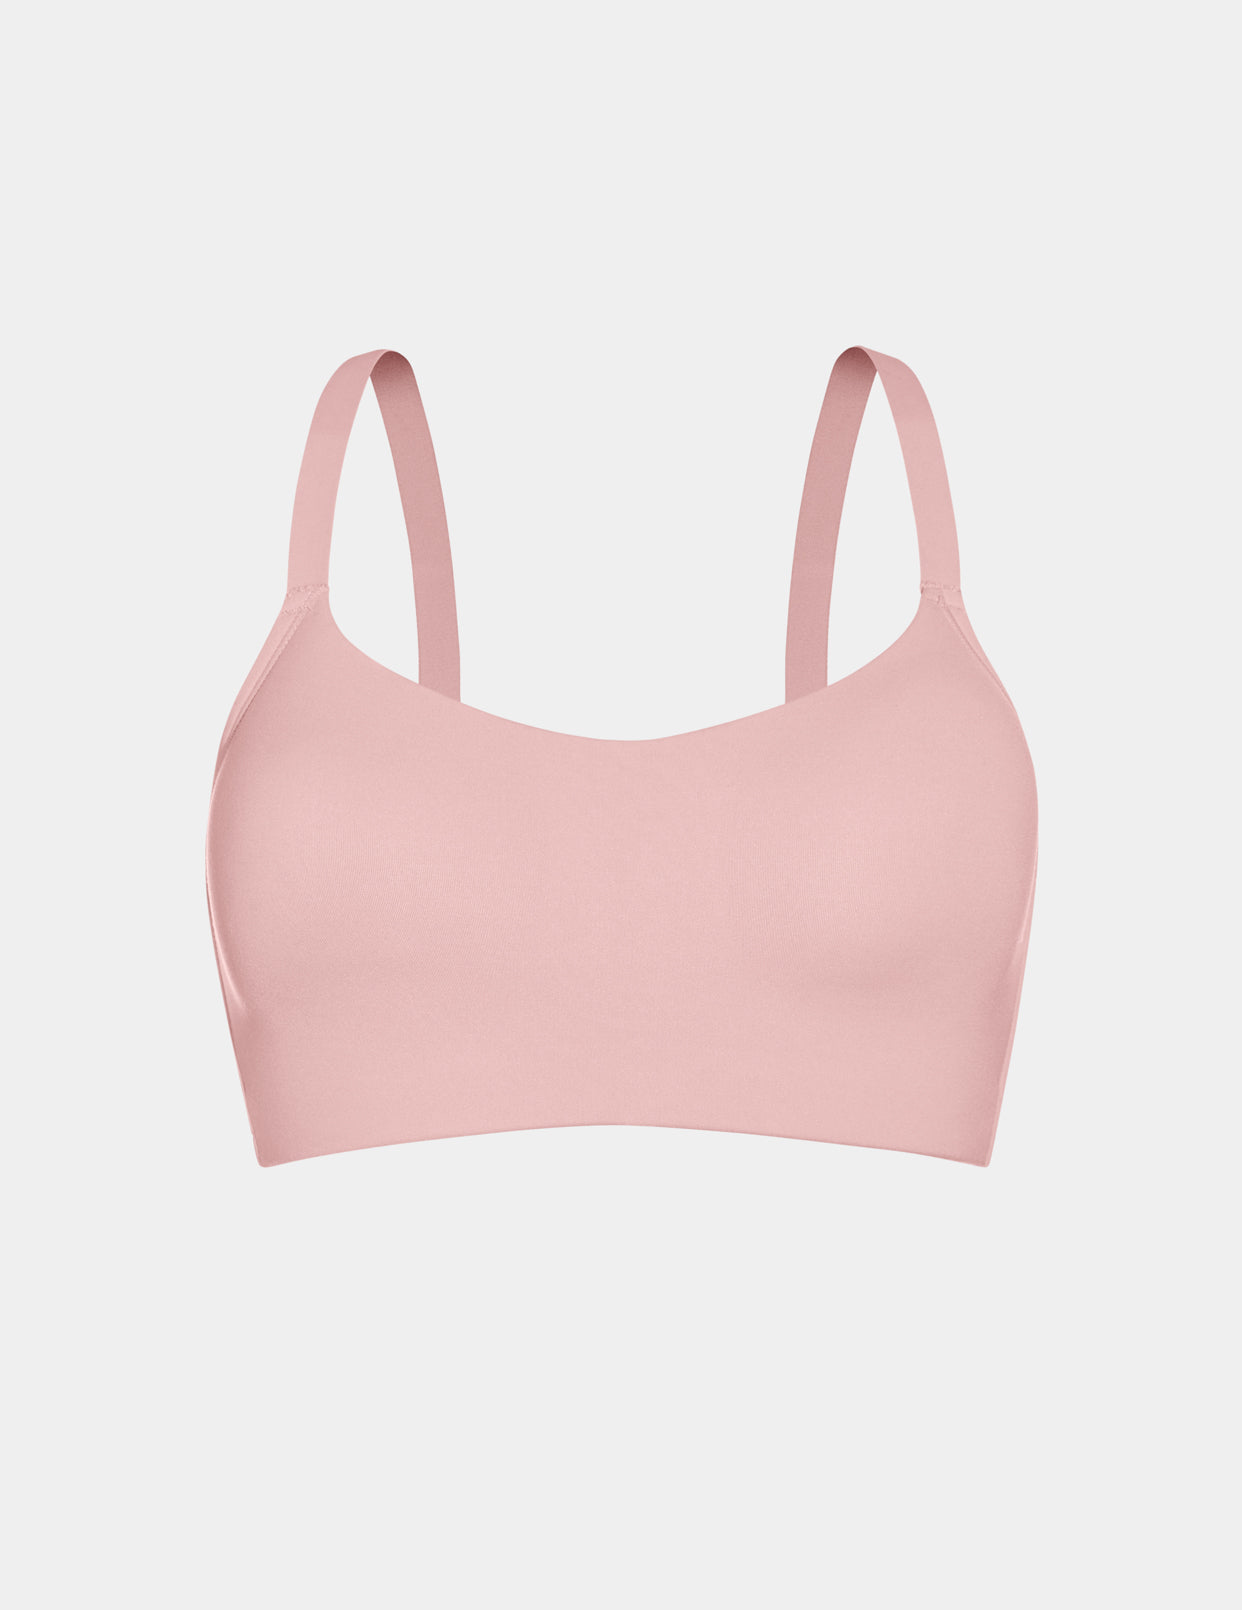 NEW One and Only Scoop Bra Review